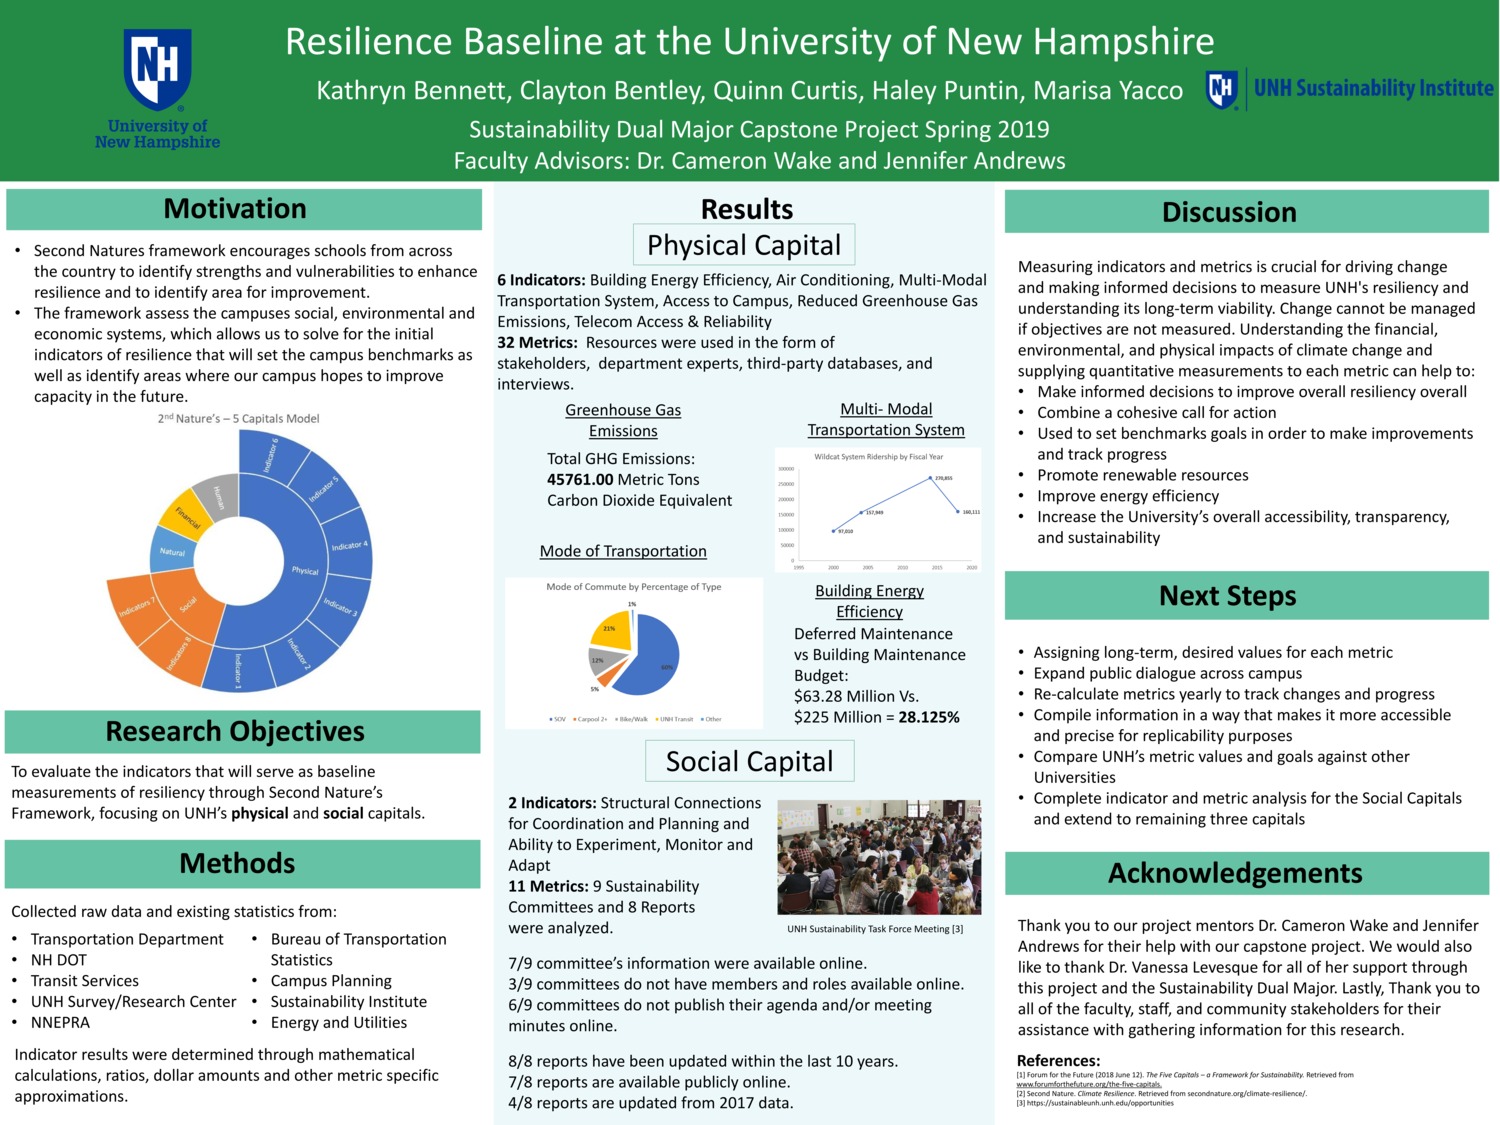 Resilience Baseline At The University Of New Hampshire by kab1006